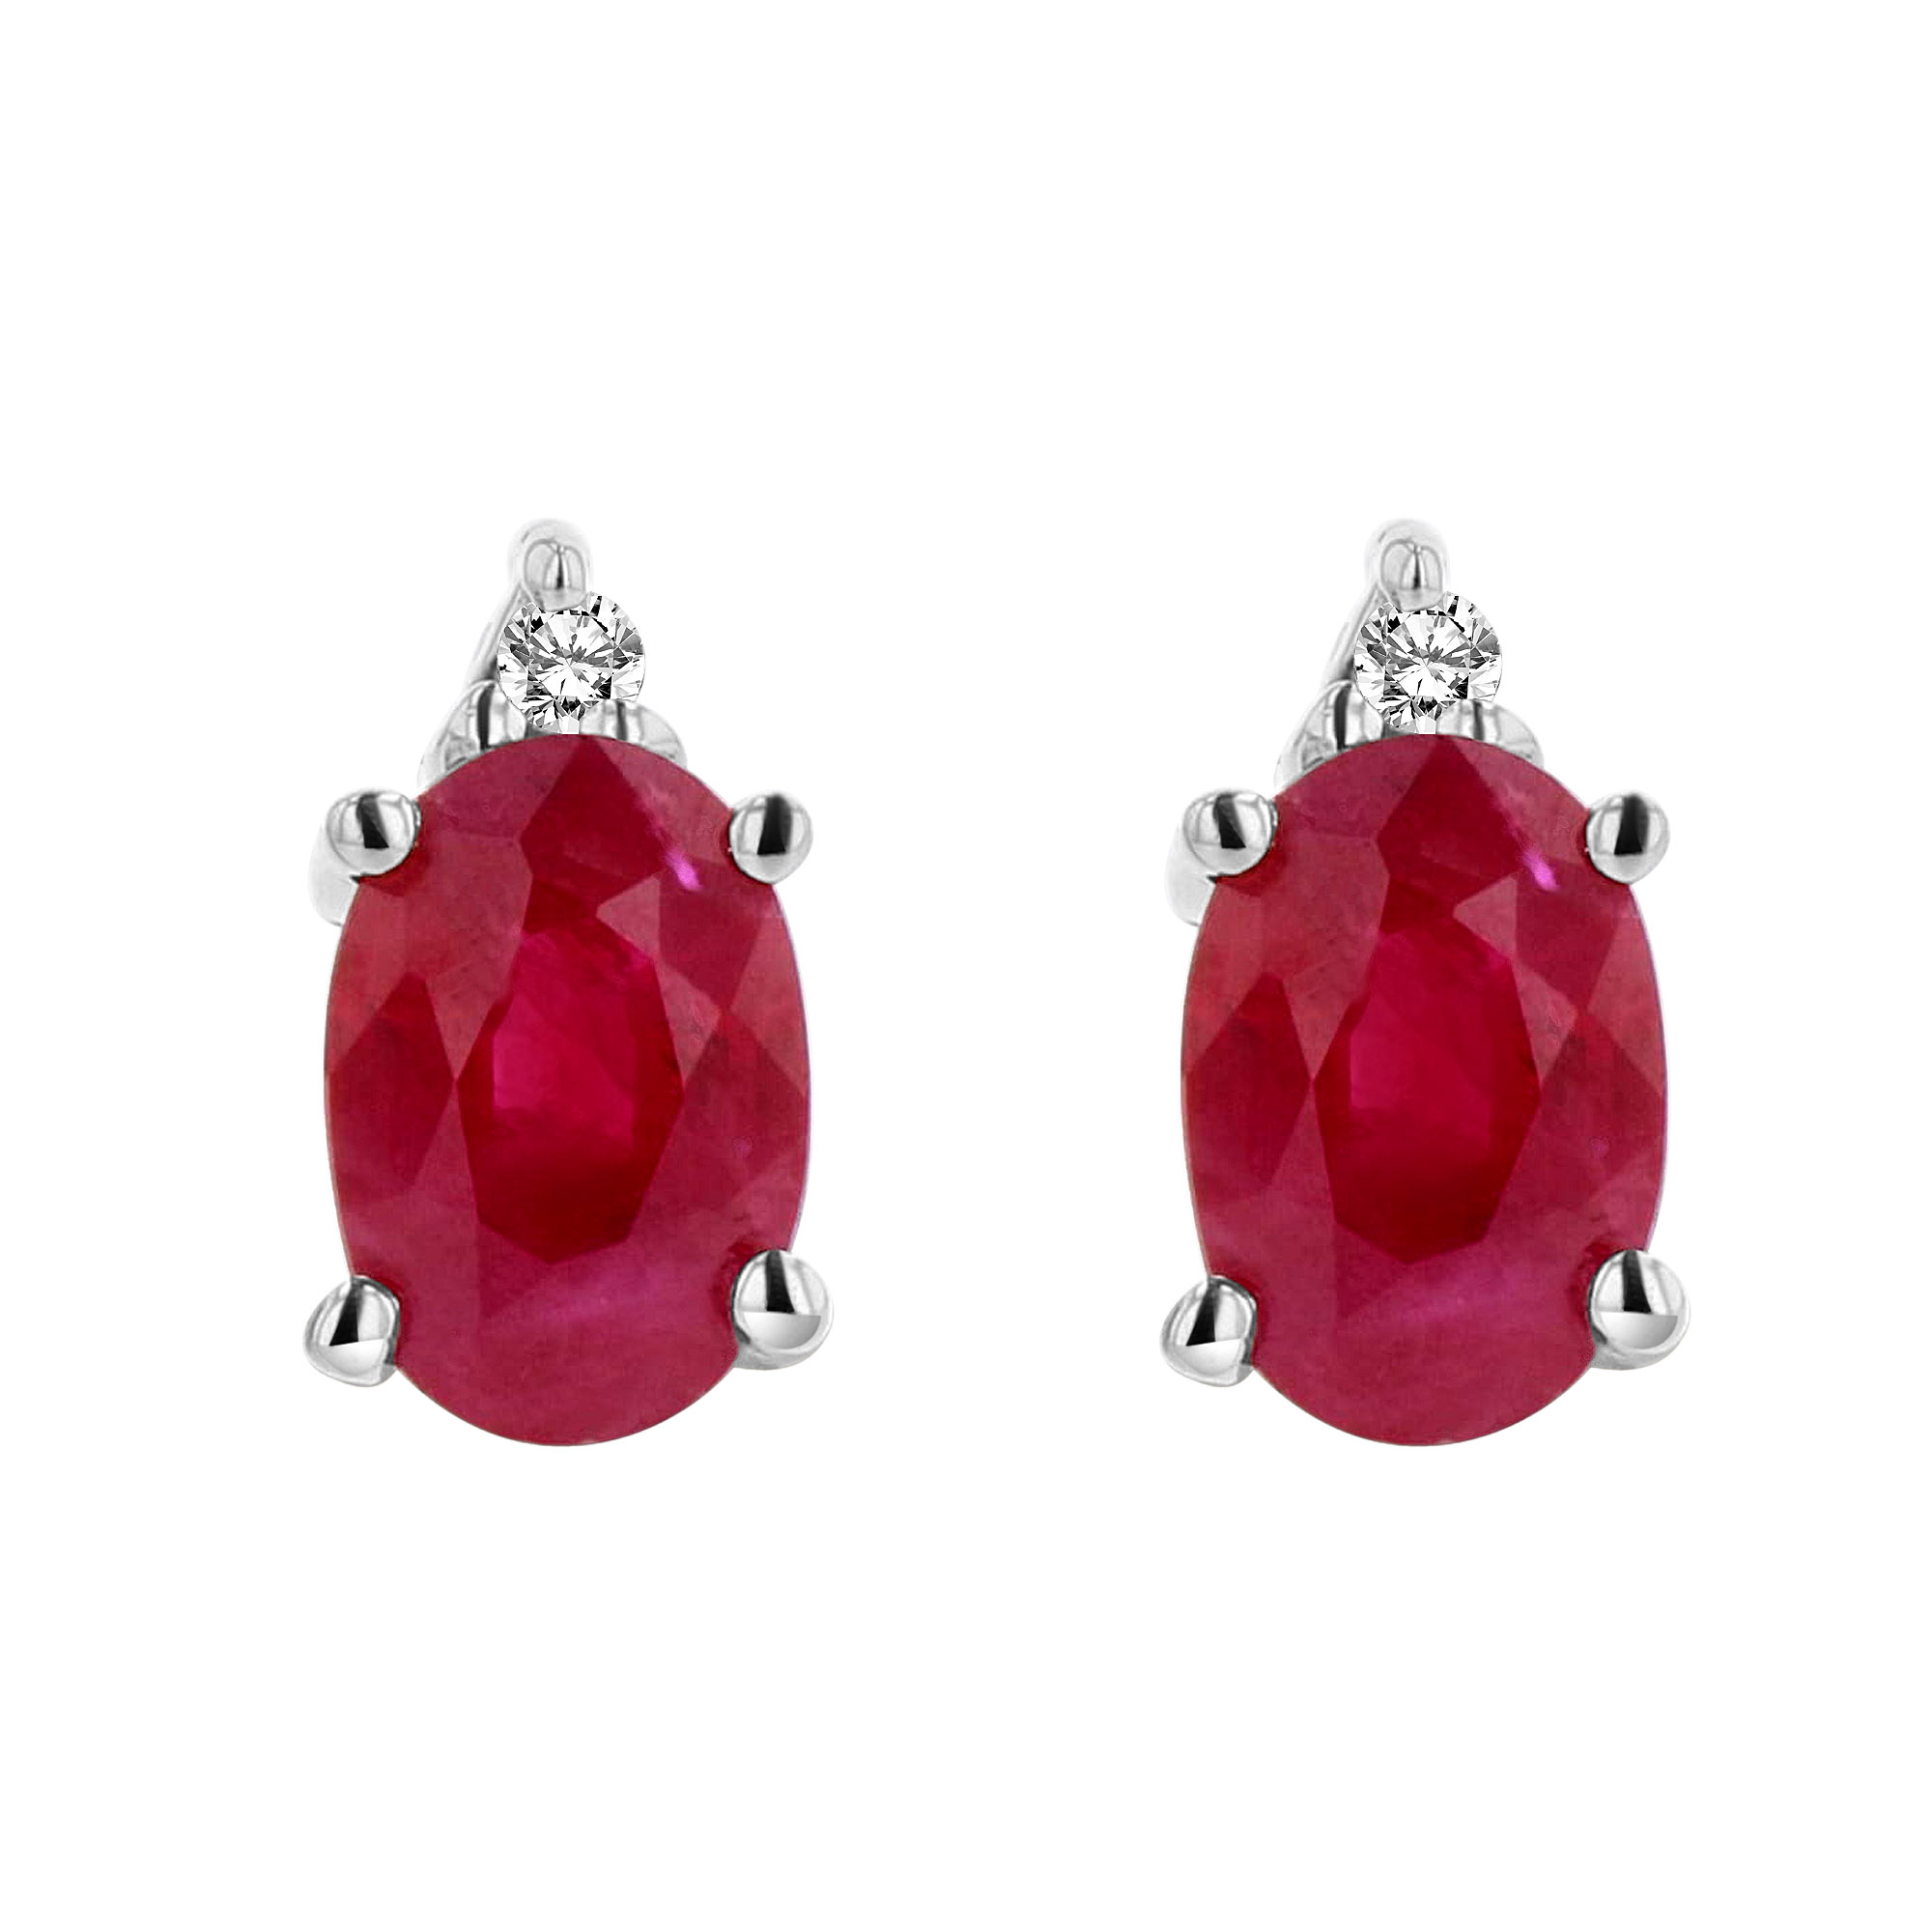 View Natural Heated Oval Ruby and Diamond Earring in 14k Gold